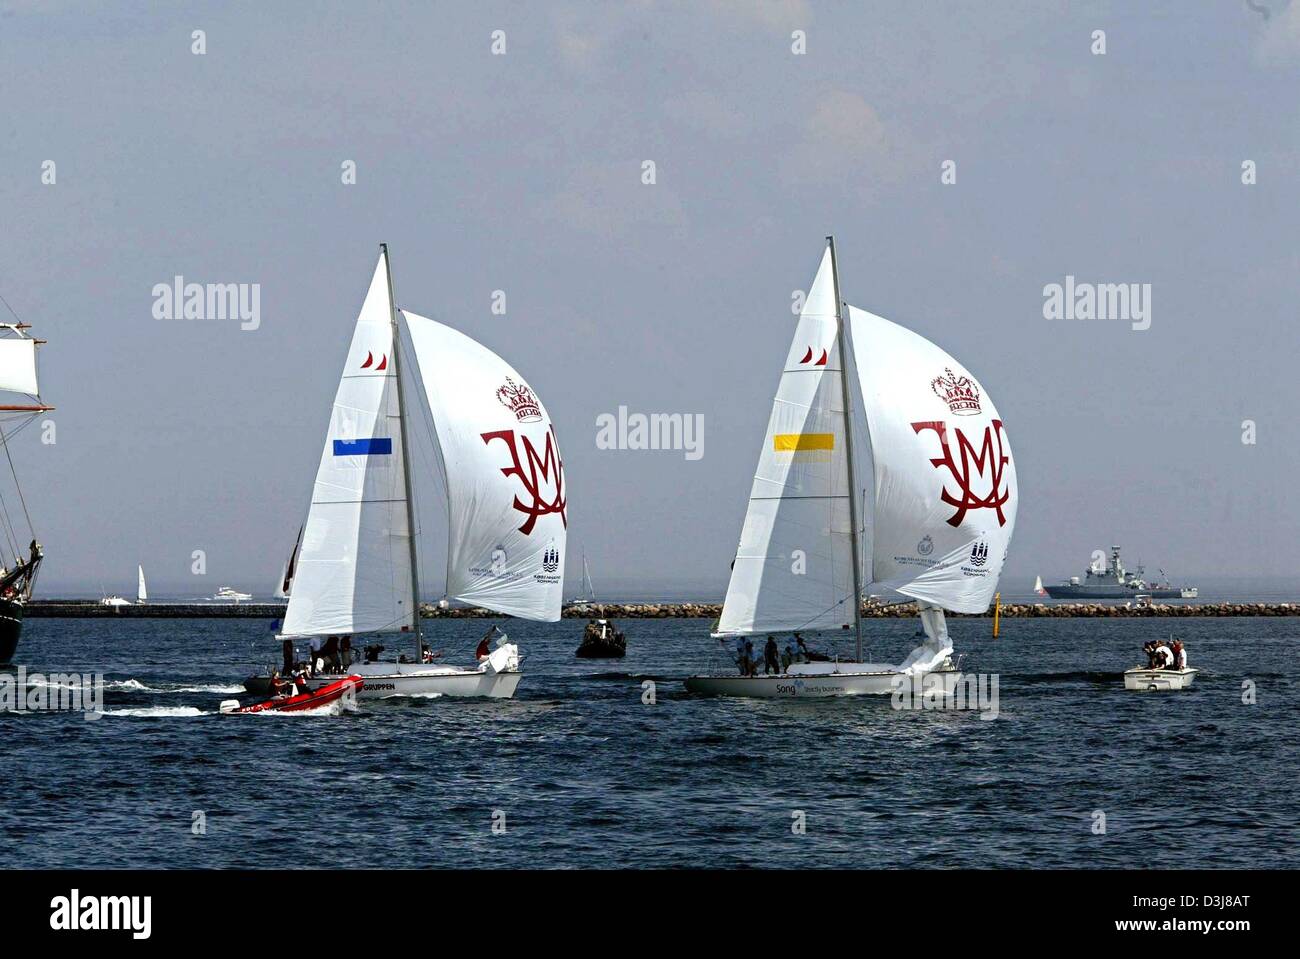 (dpa) - The sailing boats of Crown prince Frederik of Denmark and his fiancee Mary Donaldson compete with each other during a sailing regatta in the harbour of Copenhagen, Denmark, 9 May 2004. Mary and Frederik were competing with each other in a sailing regatta which was eventually won by Mary. Stock Photo